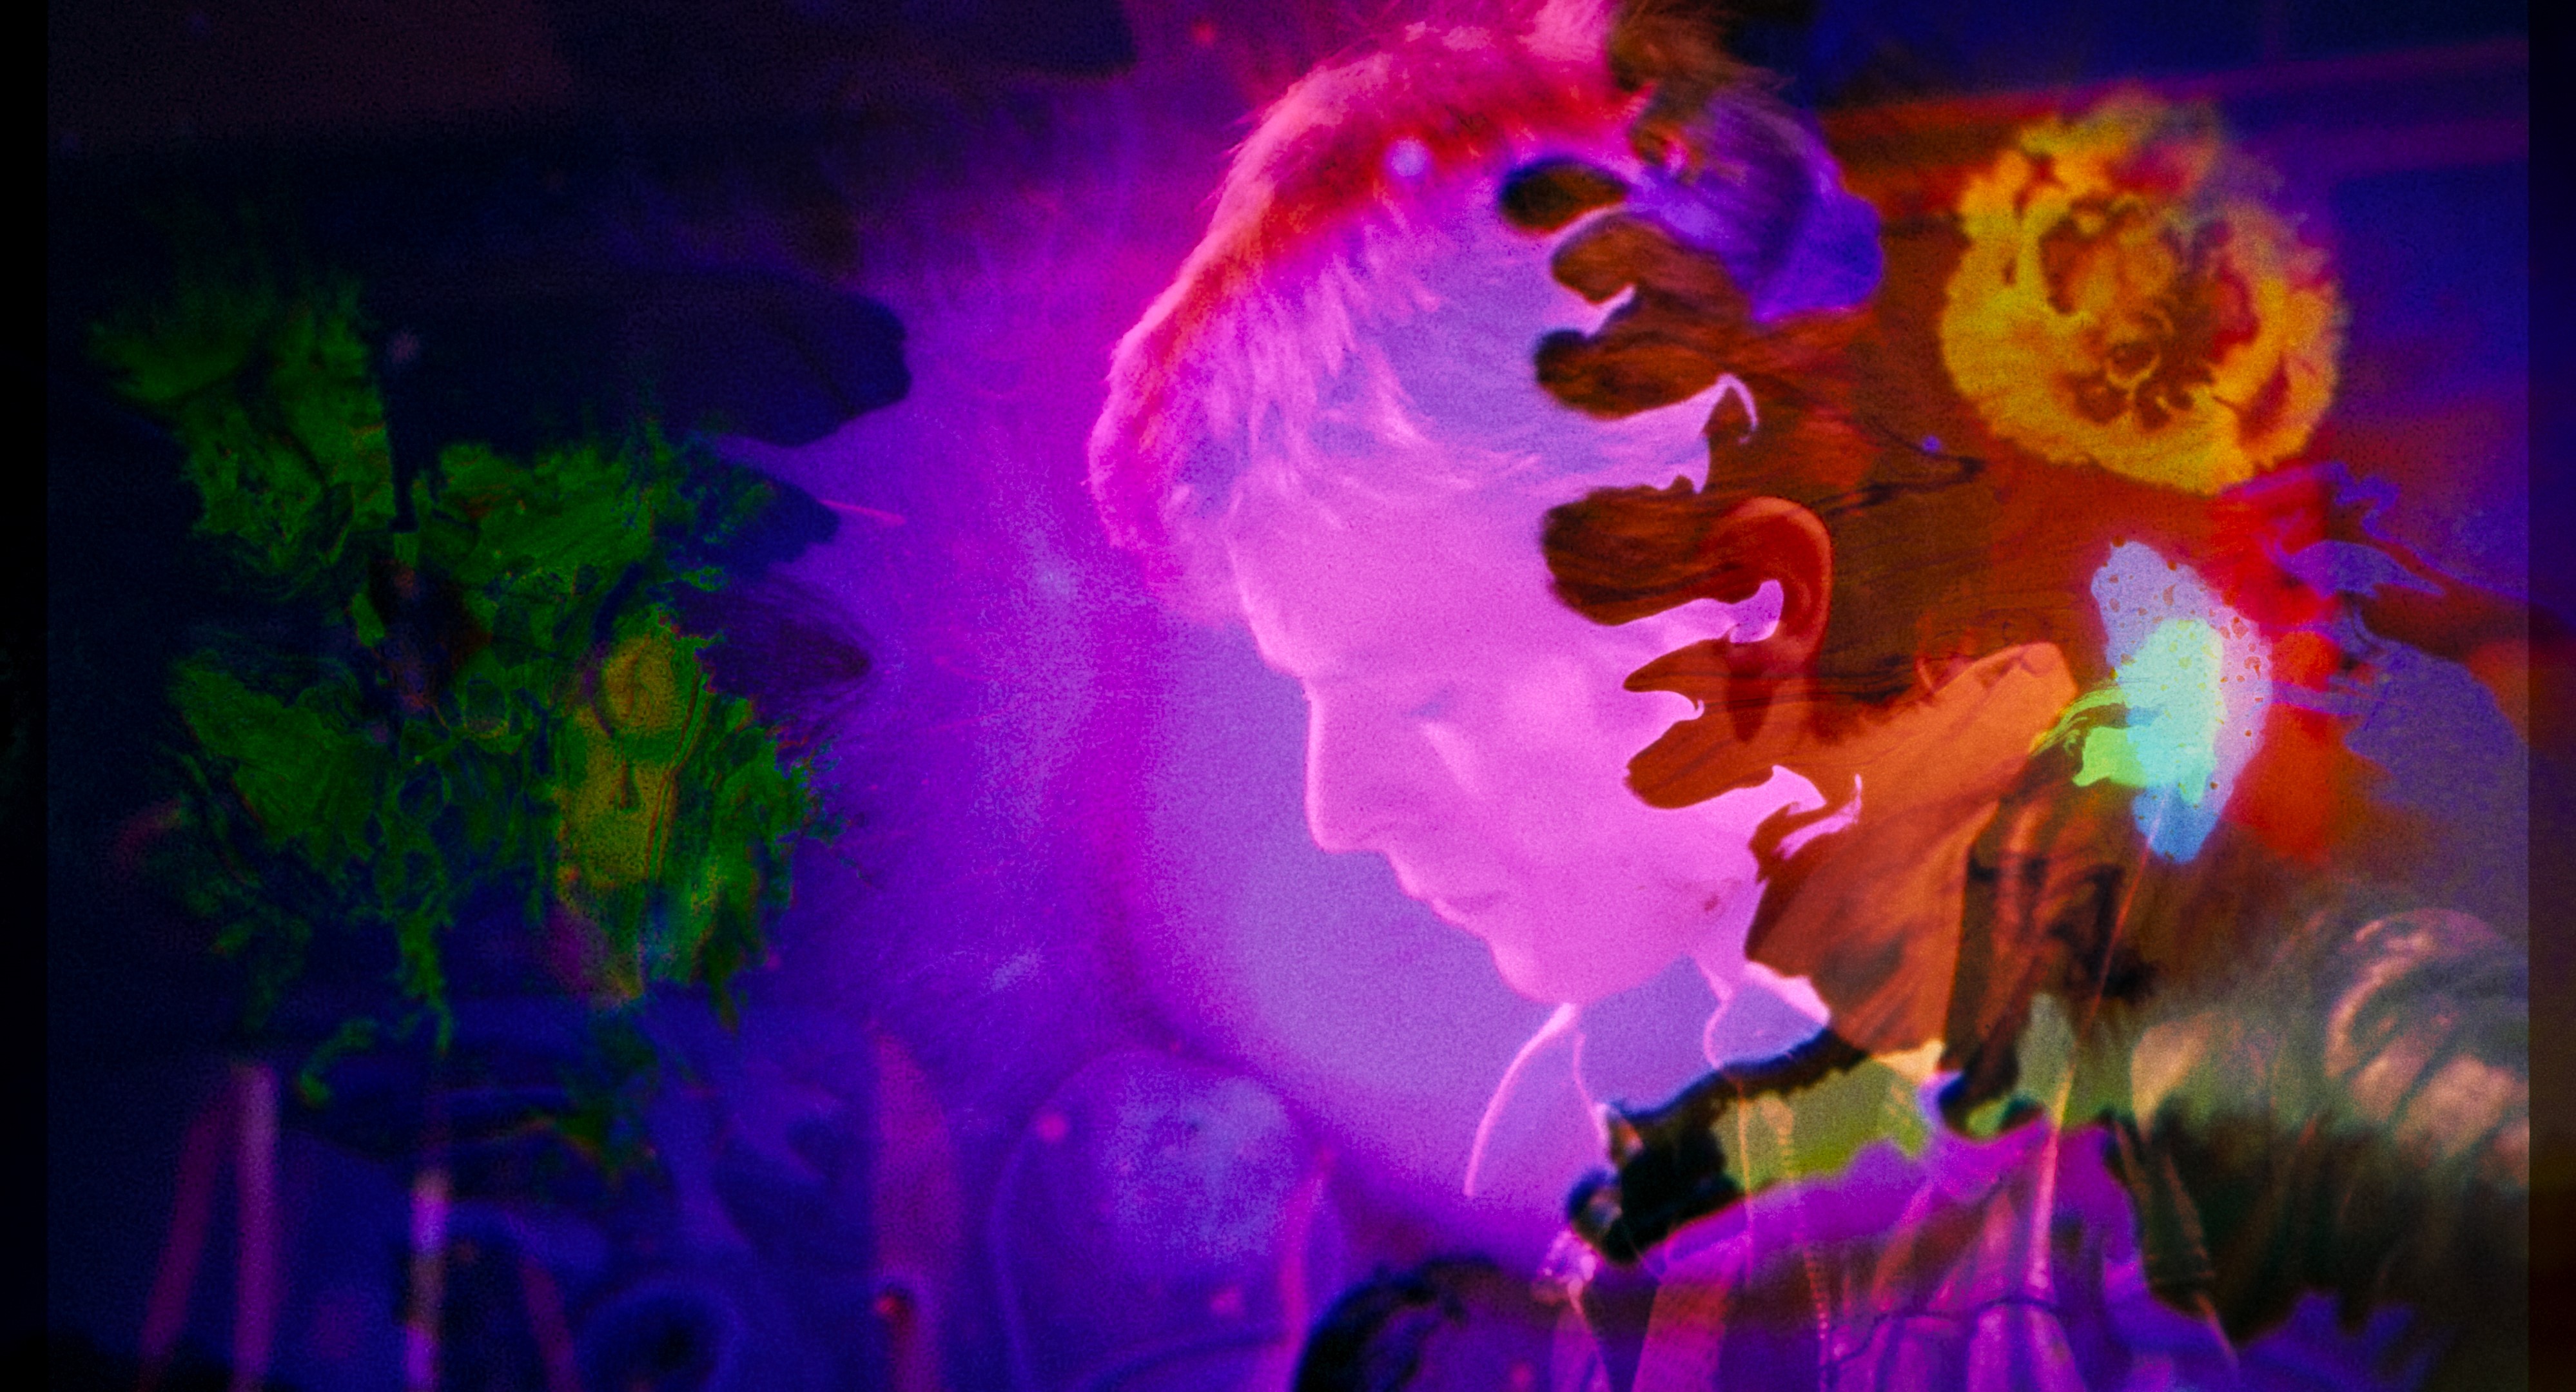 Side profile image of David Bowie, edited to include multiple colour light leaks across the image.